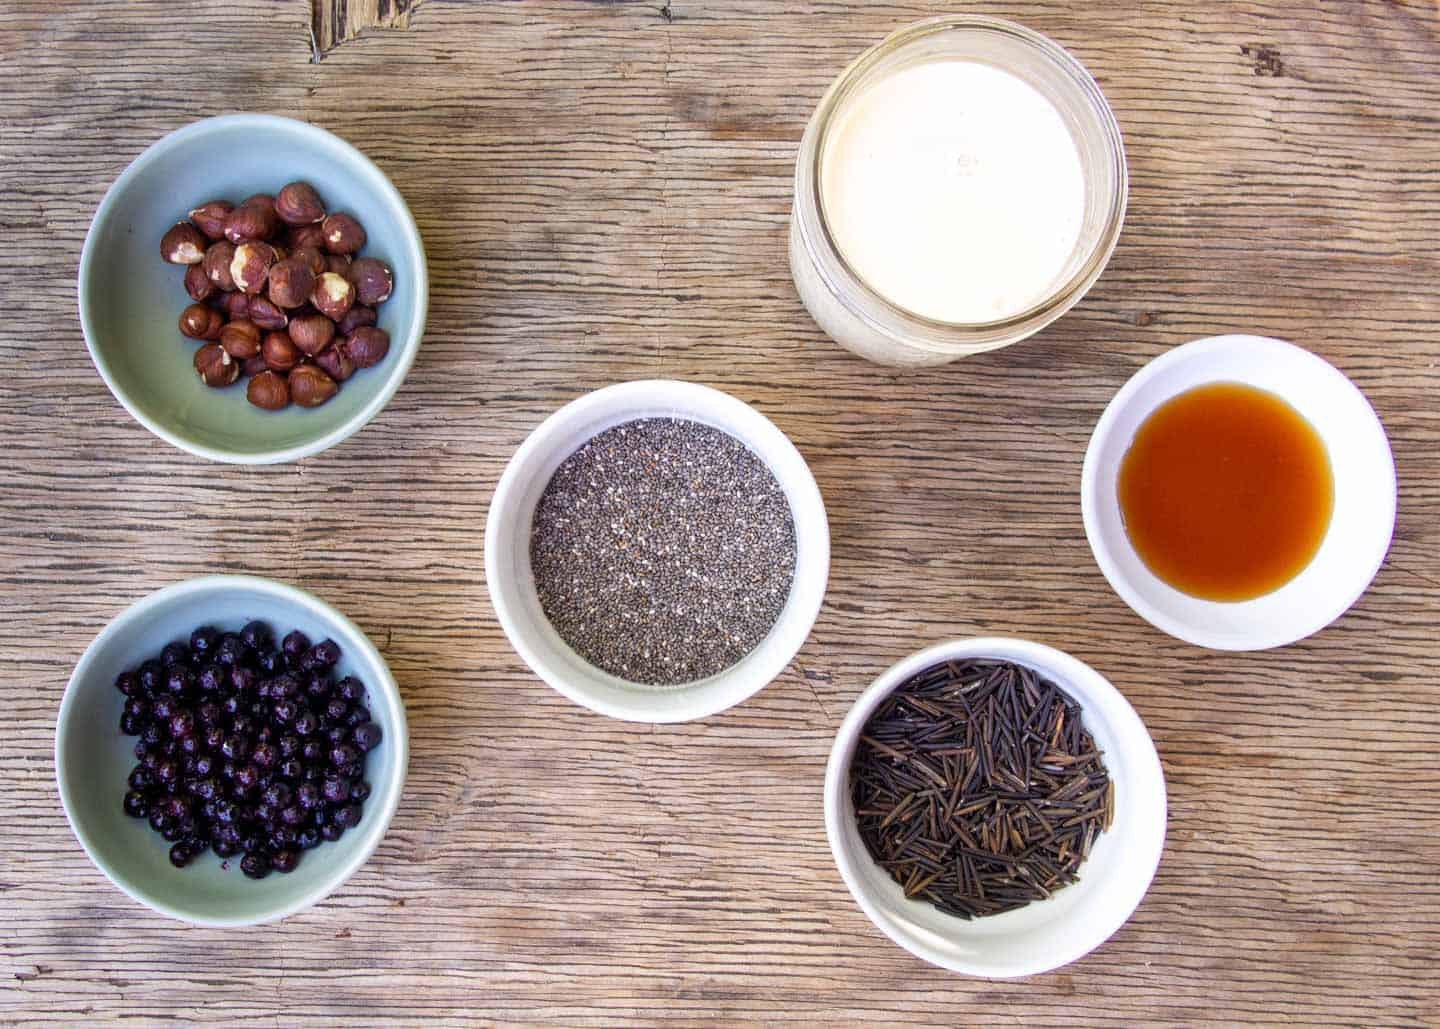 Ingredients in Small Bowls: Chia seed, wild rice, milk alternative, hazelnuts, berries, maple syrup